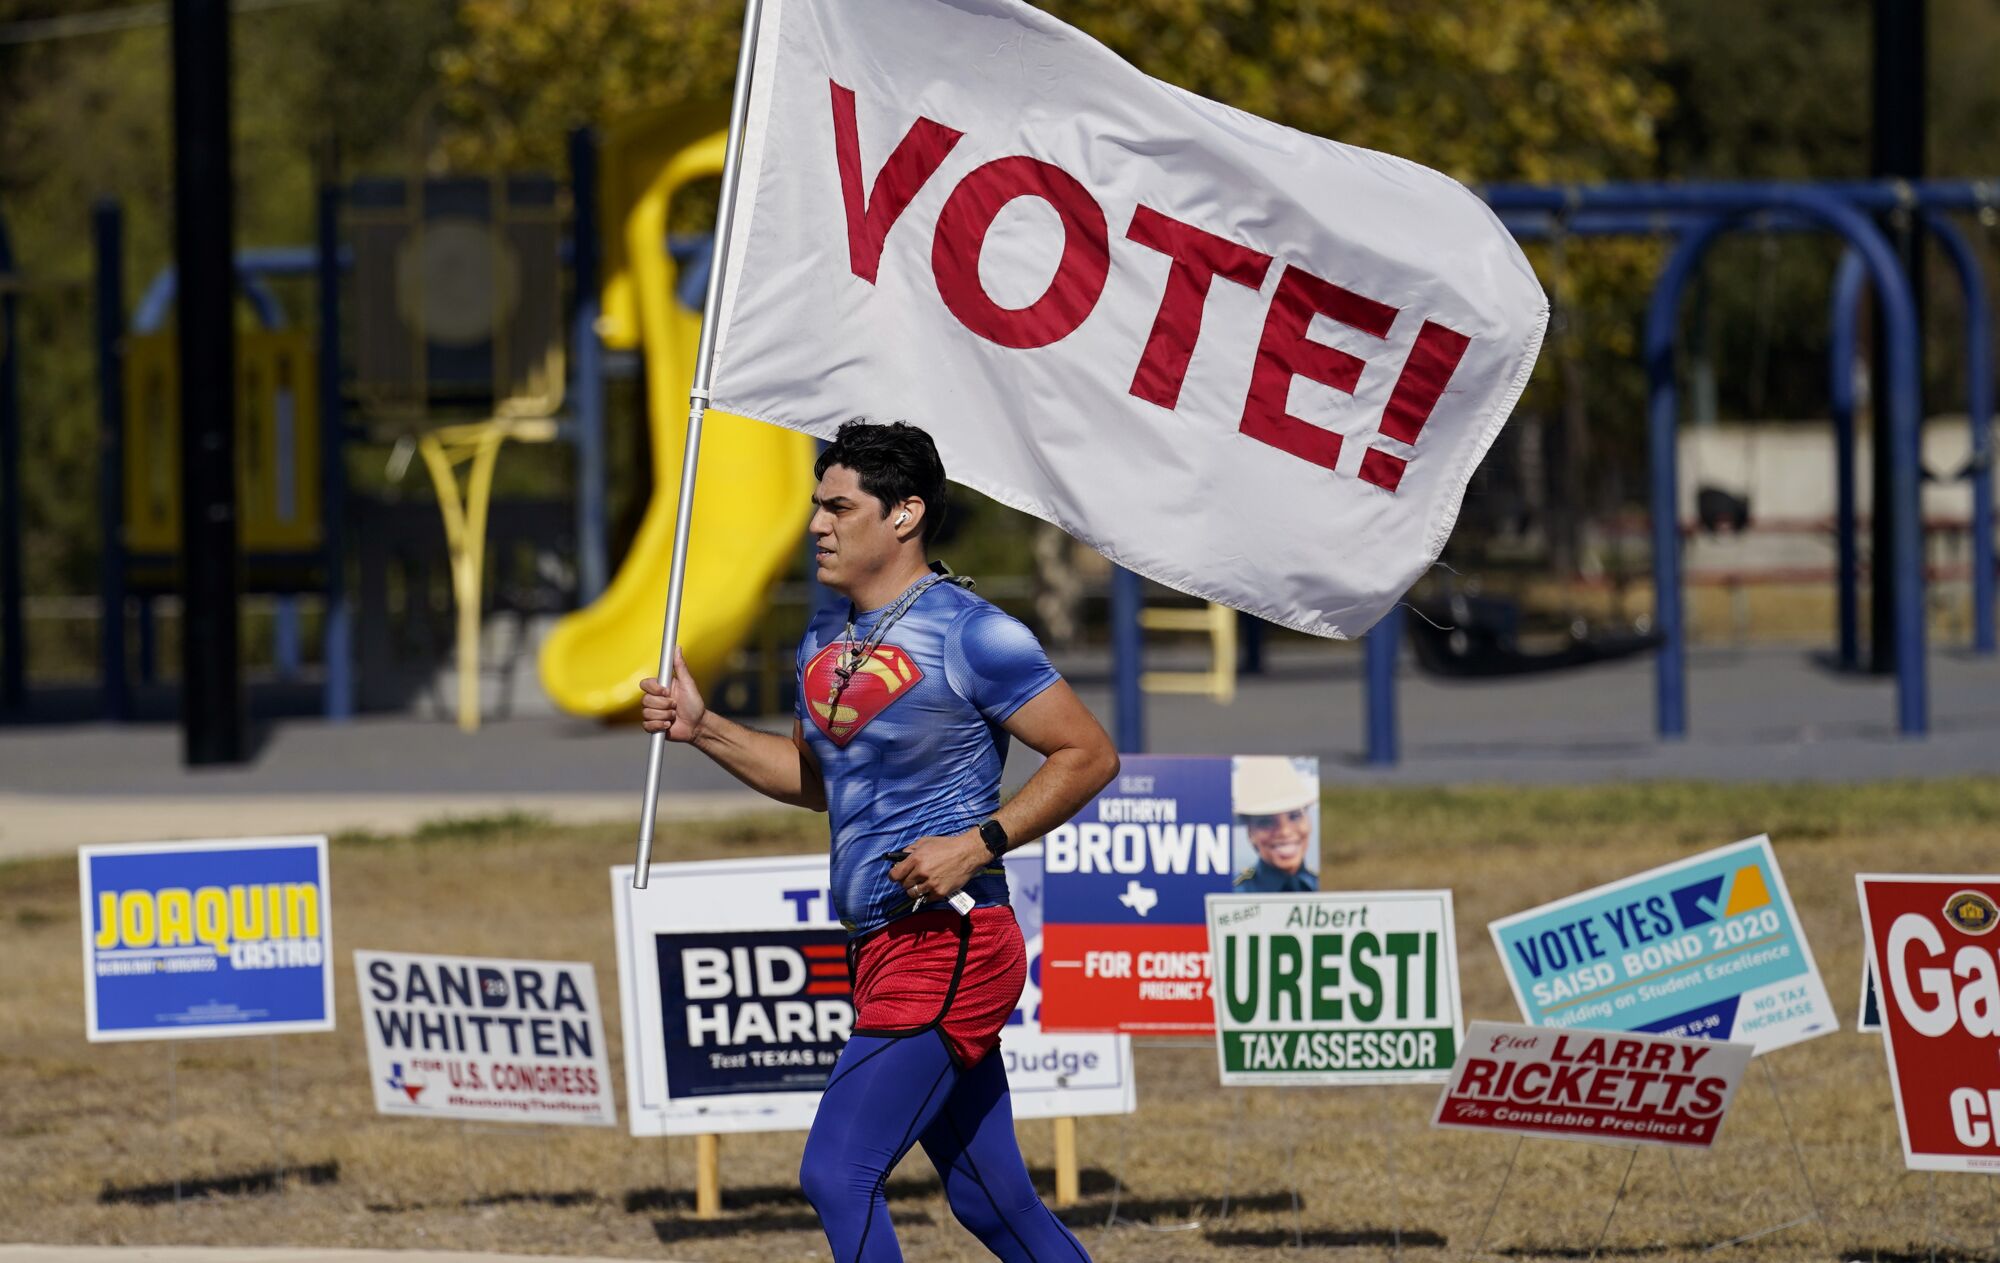 A jogger carries a flag encouraging people to vote as he passes a polling station in San Antonio on Tuesday.